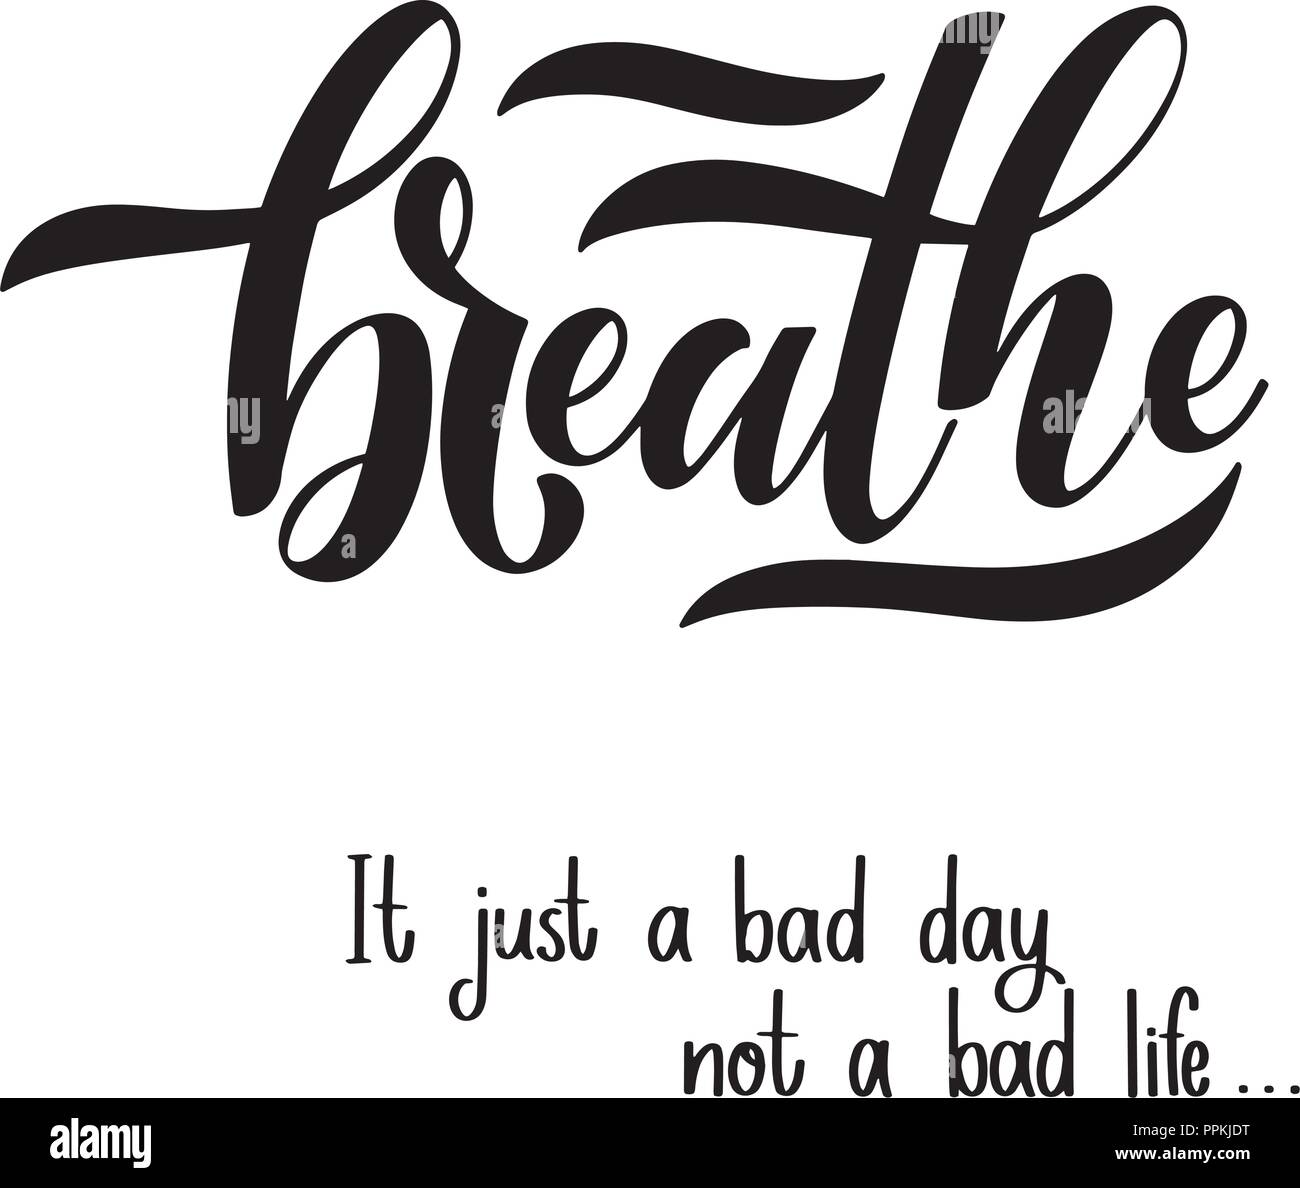 Motivational And Inspirational Quotes For Mental Health Day Breathe